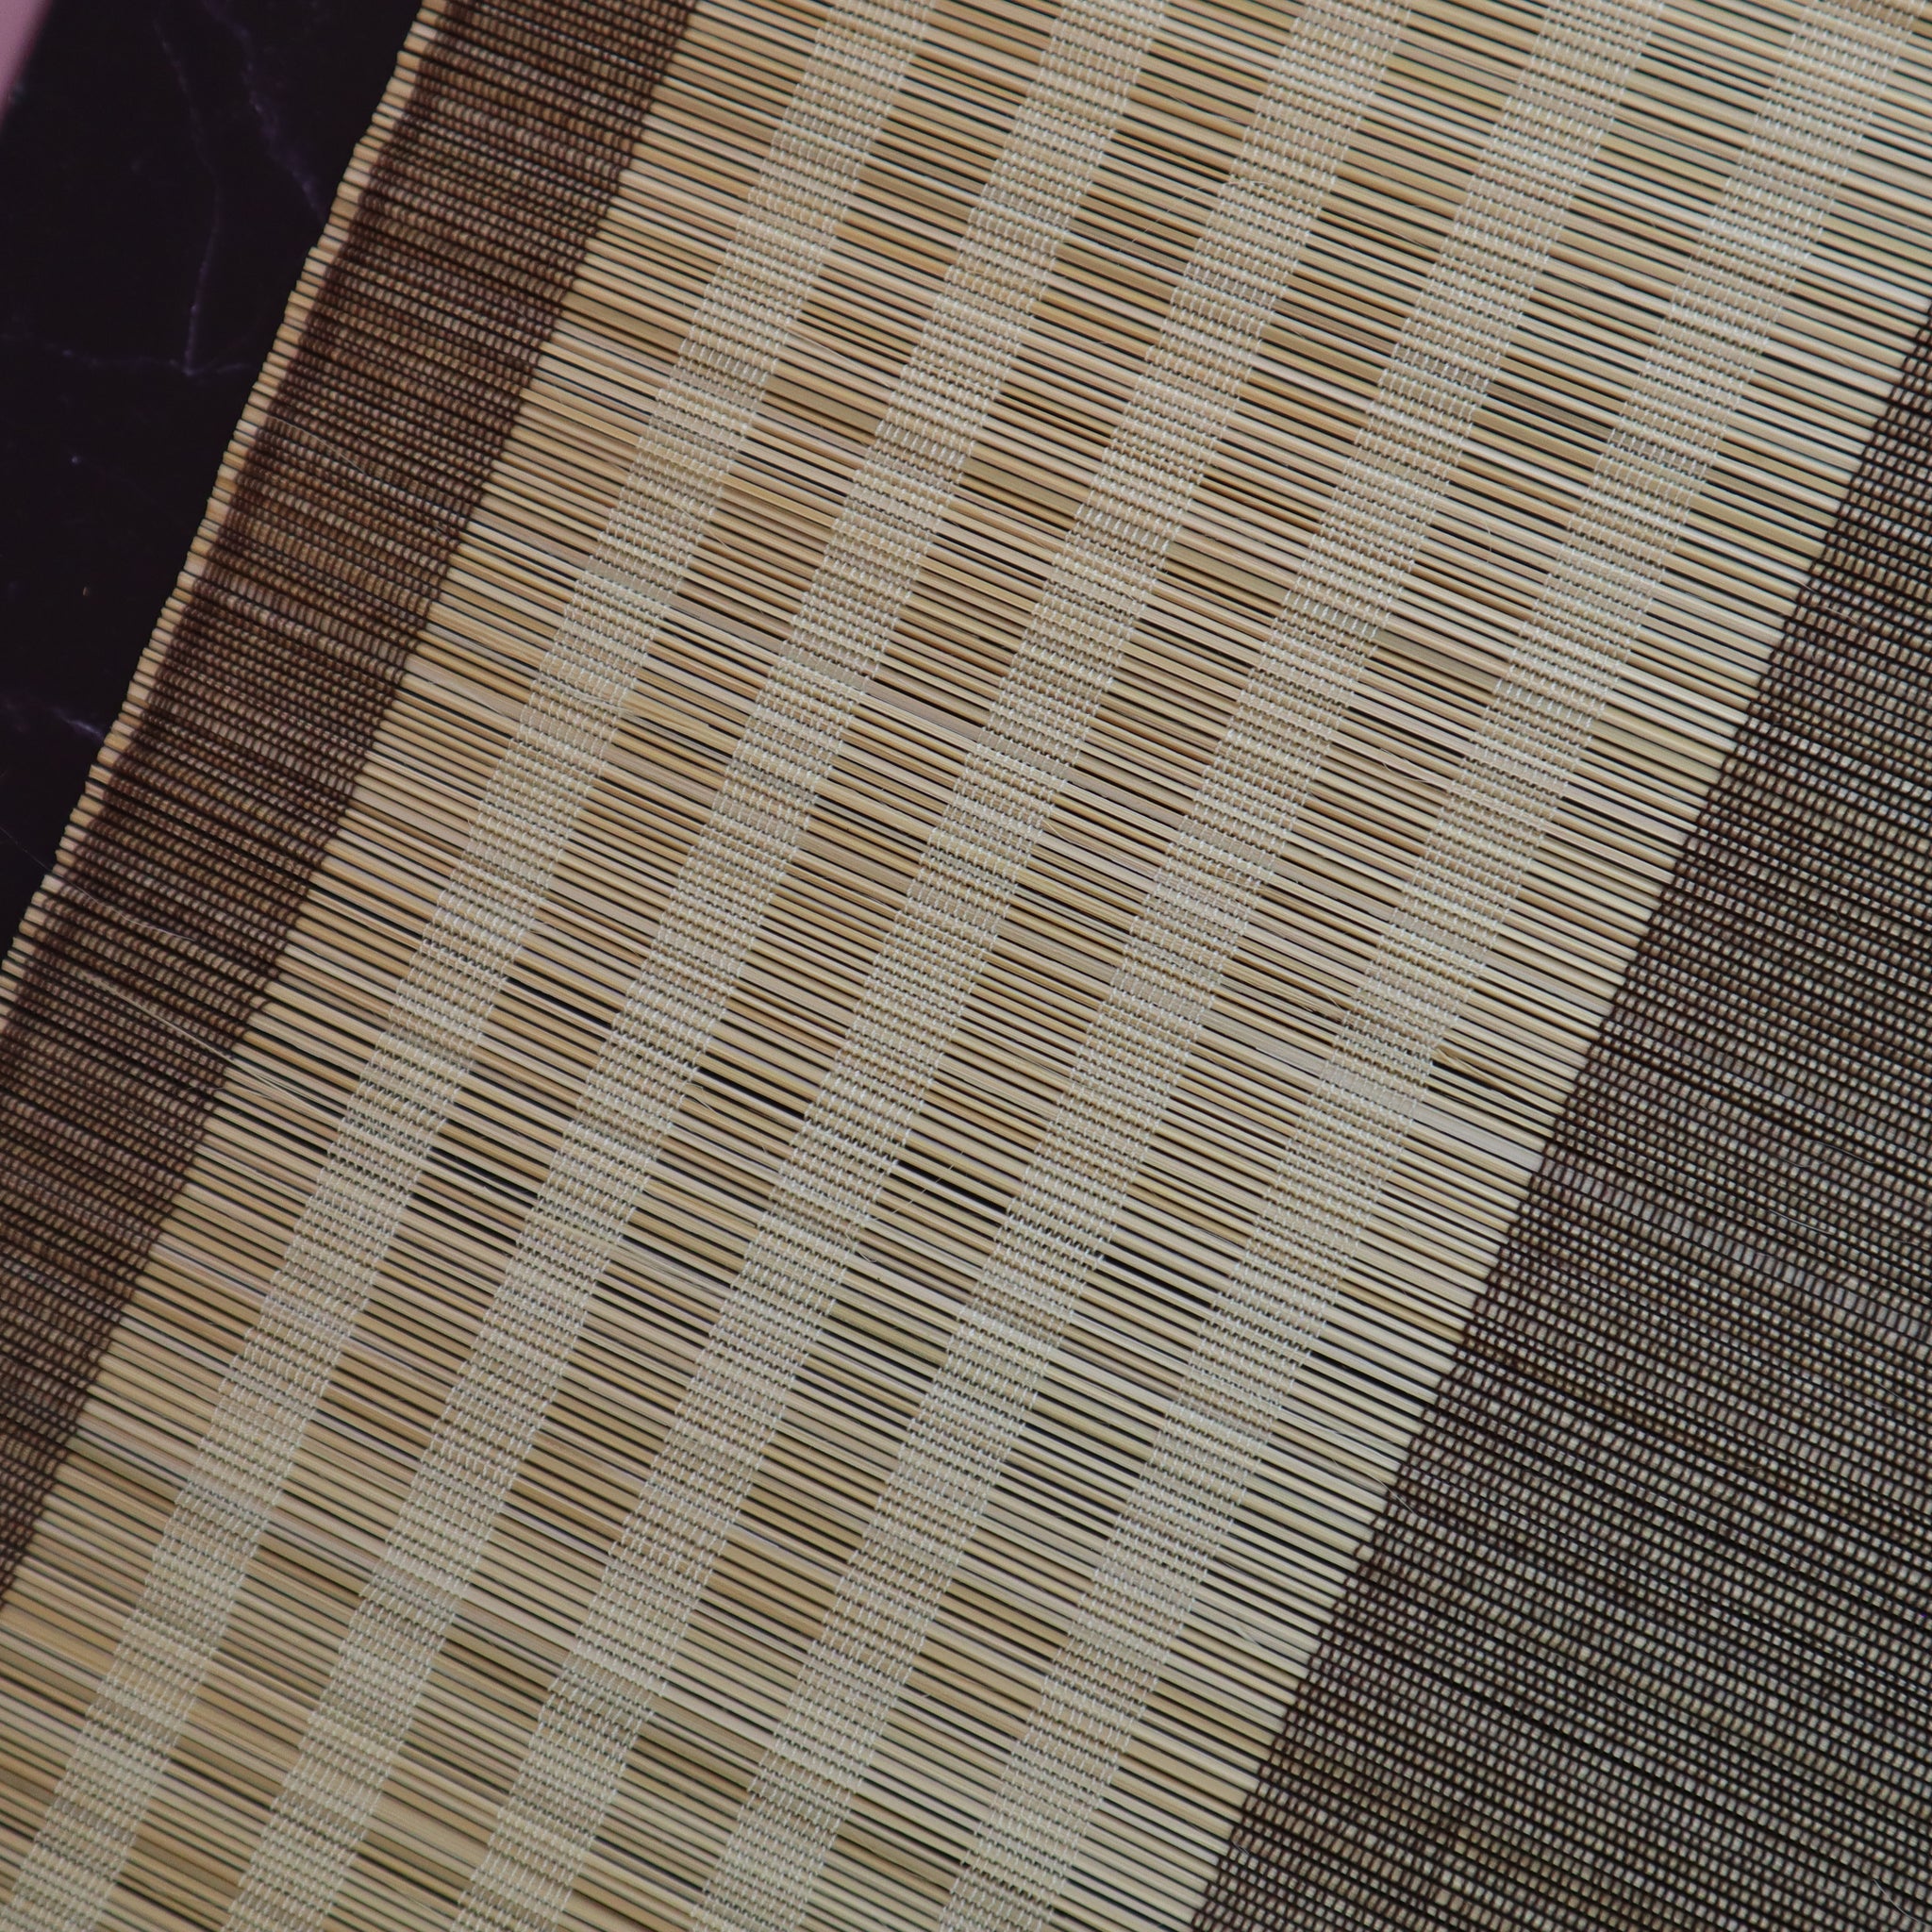 VIETNAMESE BAMBOO BEIGE AND BROWN MODERN PLACEMAT